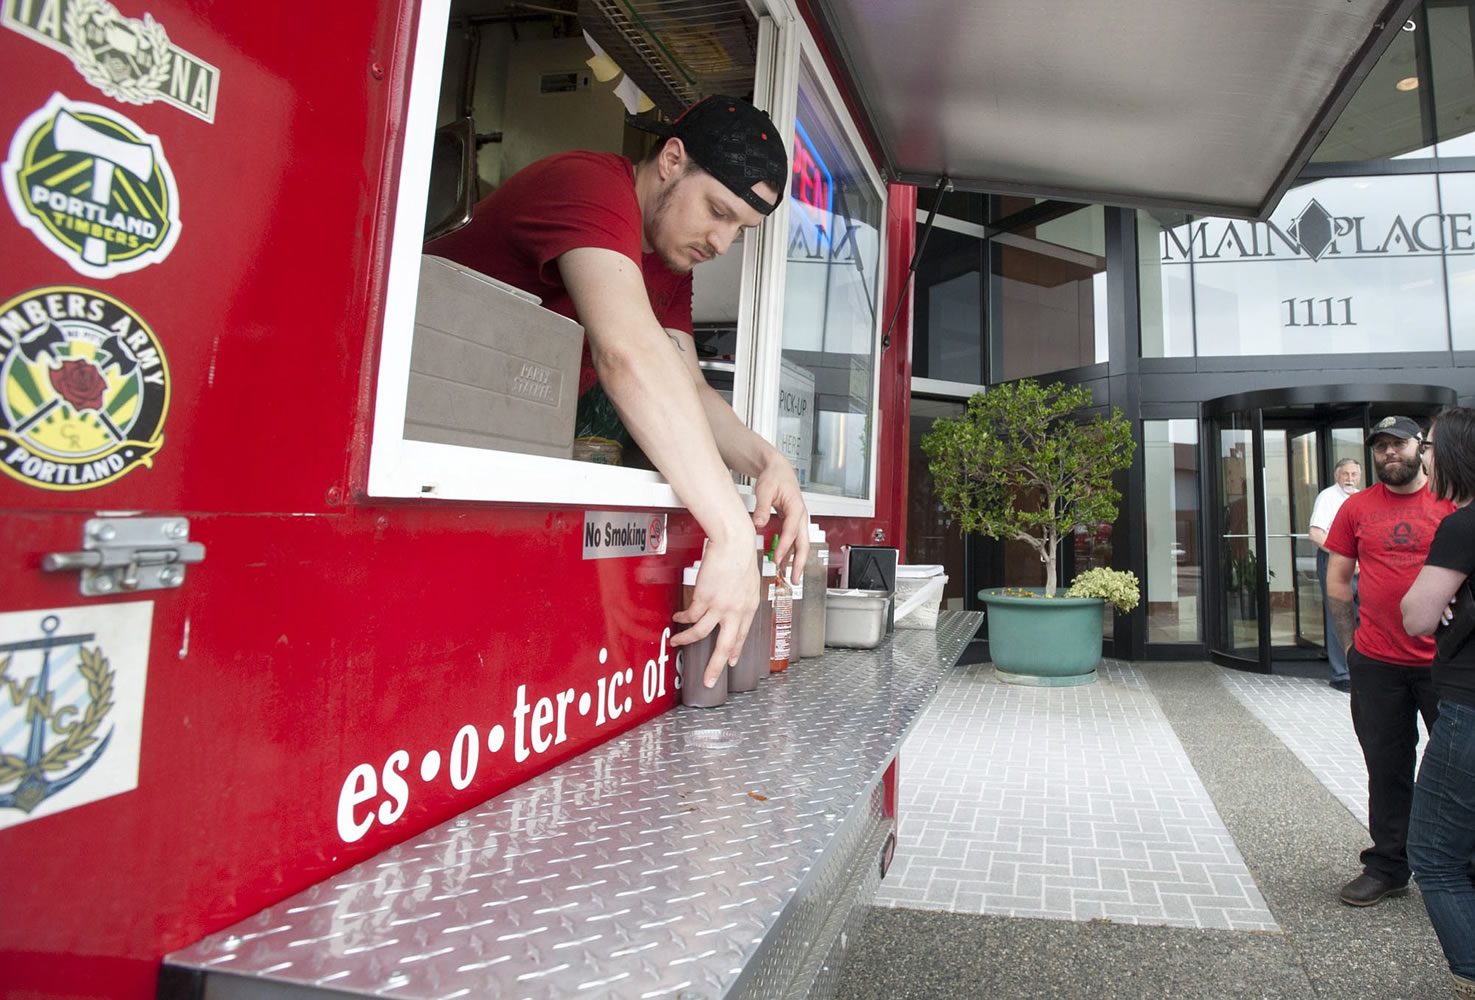 Daniel Honeycutt arranges condiments at the Esoteric BBQ food cart in Vancouver on Tuesday.